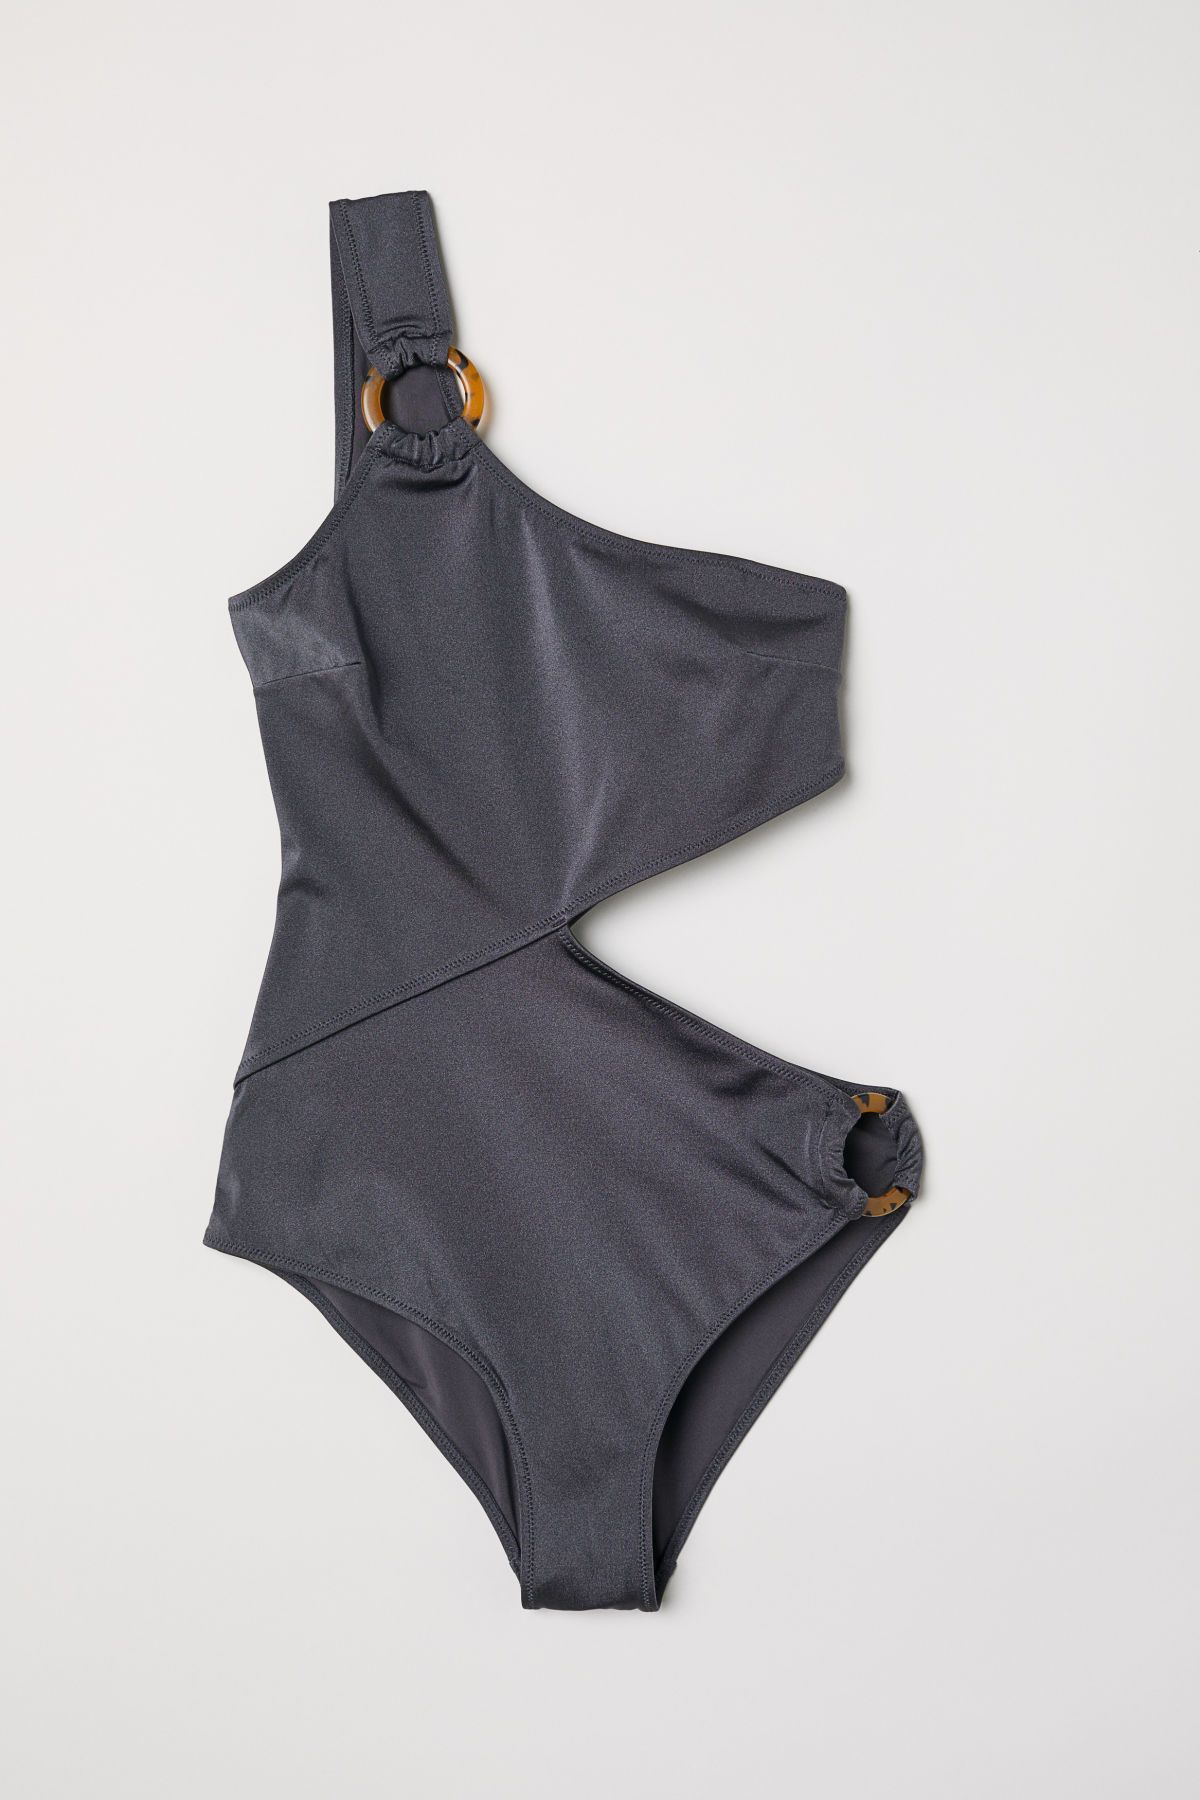 h&m is stocking the best swimsuits for spring